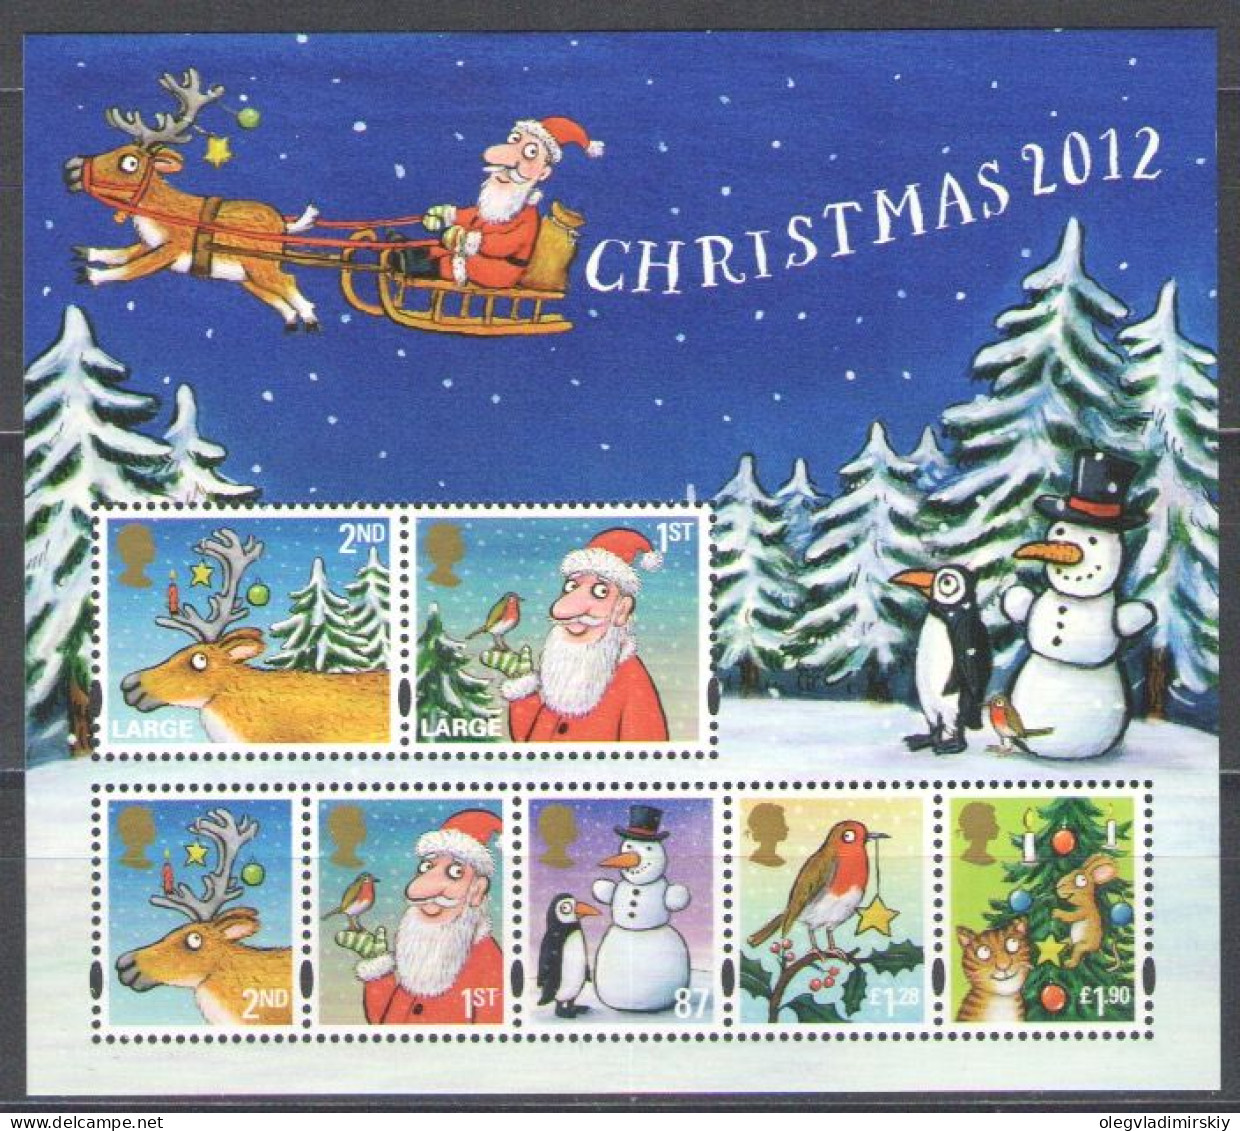 Great Britain United Kingdom 2012 Christmas Set Of 7 Classic Stamps In Block MNH - Kerstmis